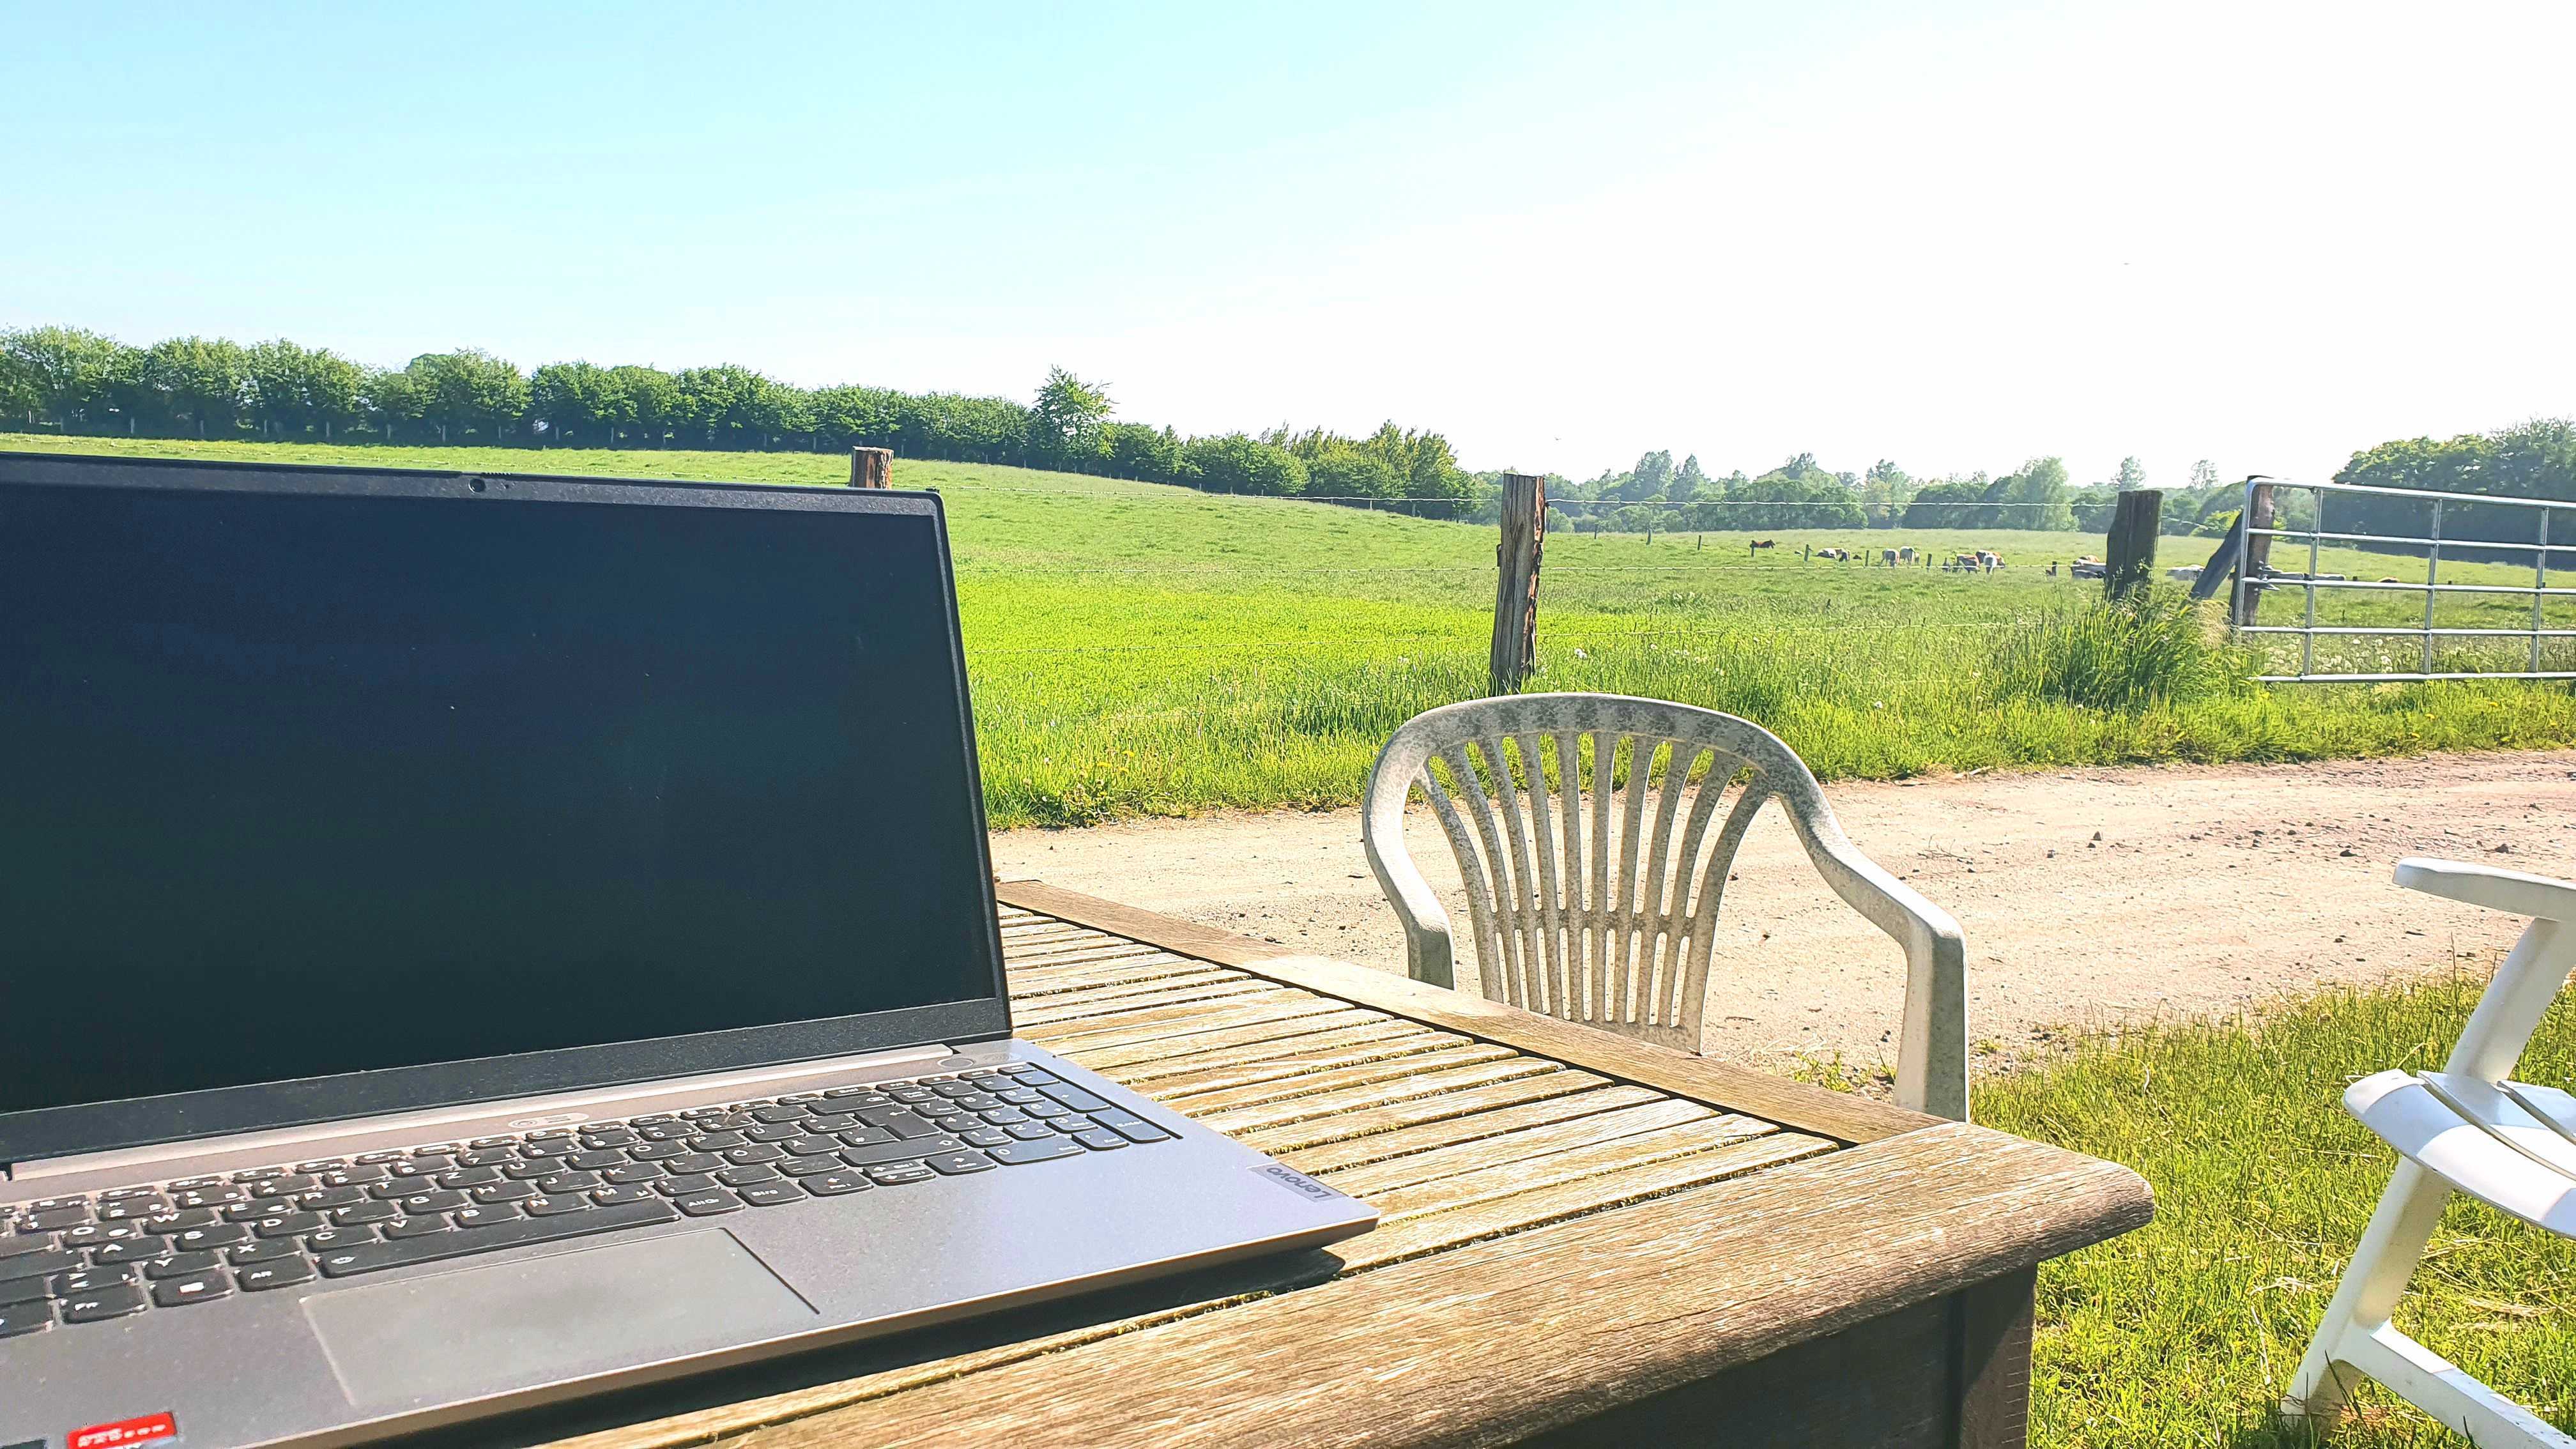 A laptop standing on a wooden table outdoors, behind it meadows and forest view